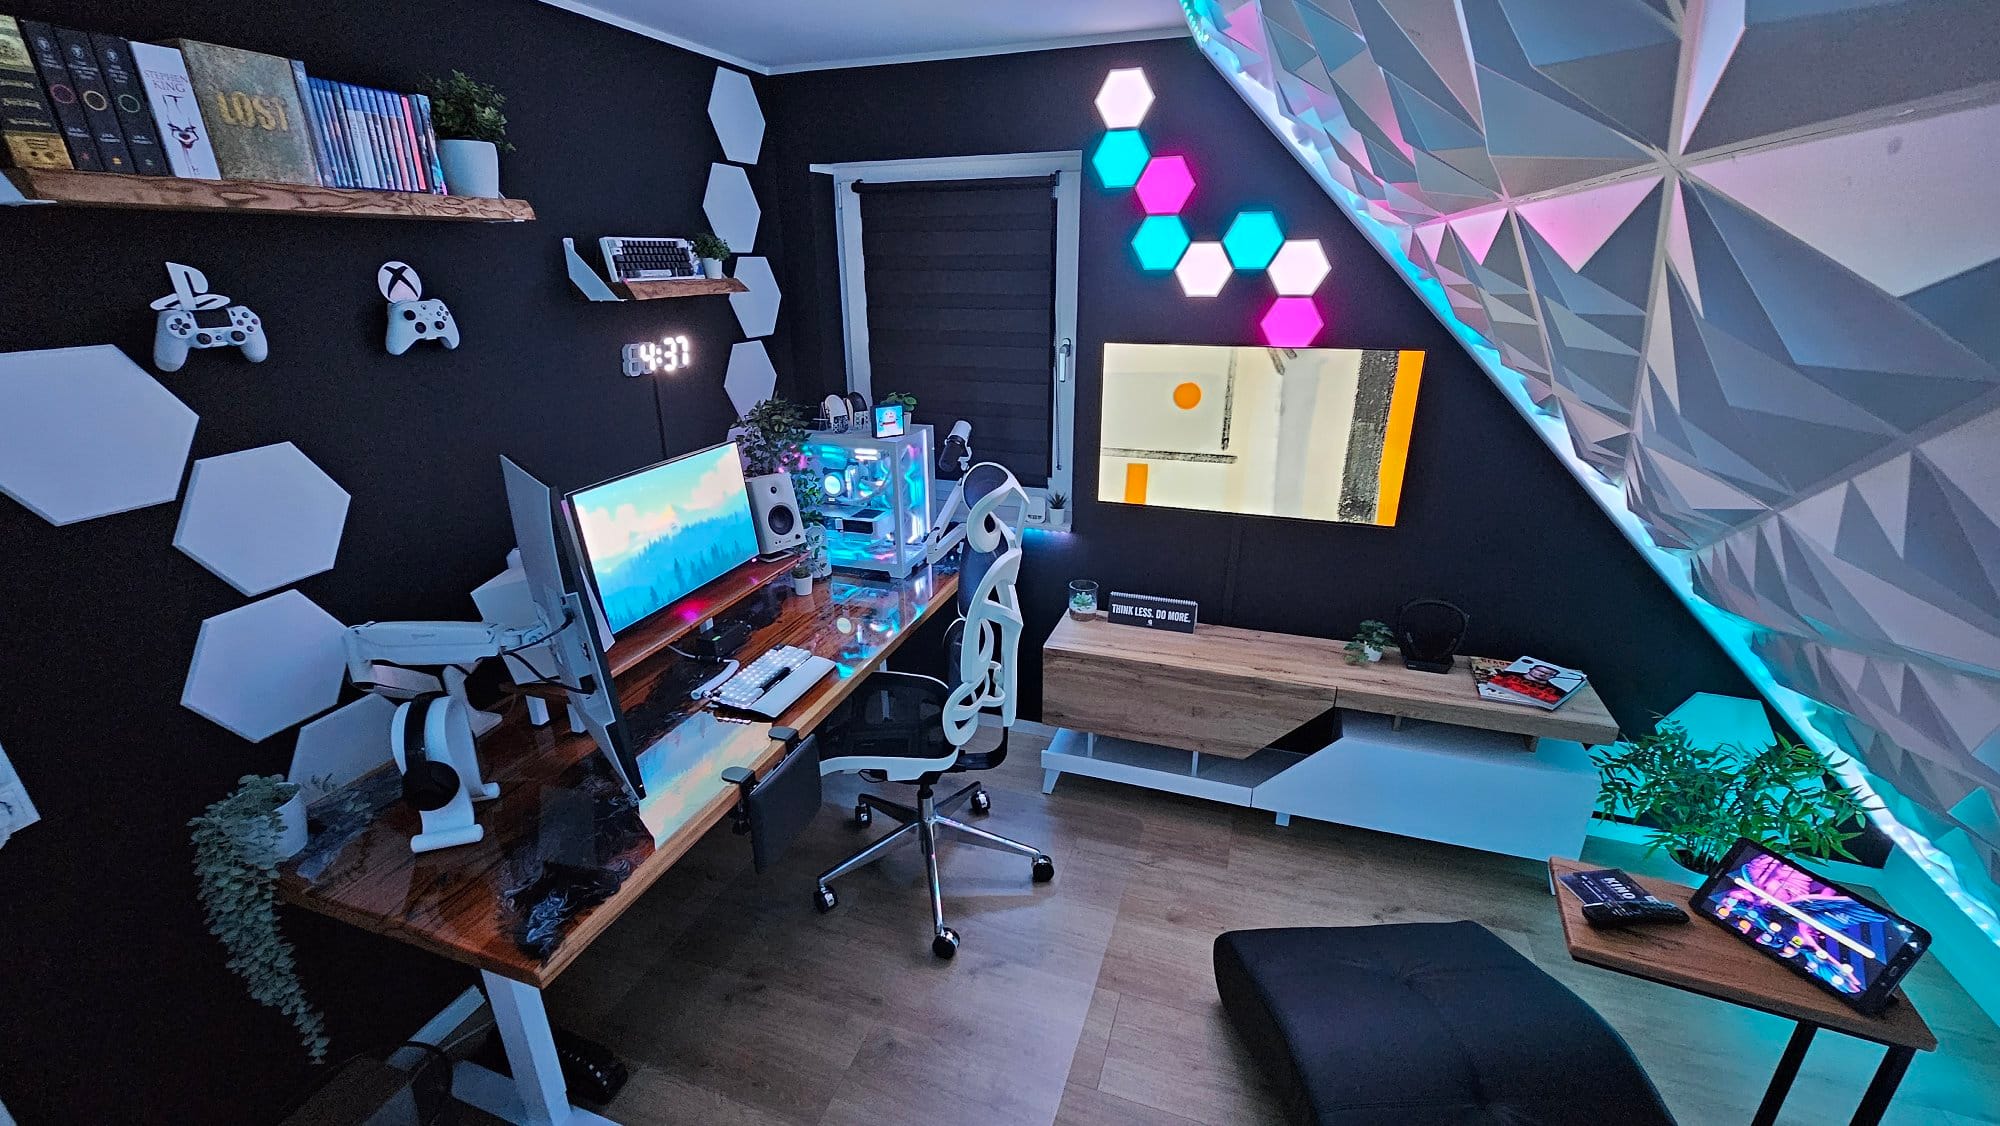 A panoramic view of a dark-themed gaming room with ambient lighting, featuring a multi-monitor PC setup, decorative acoustic panels, floating shelves with books, gaming controllers on the wall, and a cosy lounge chair